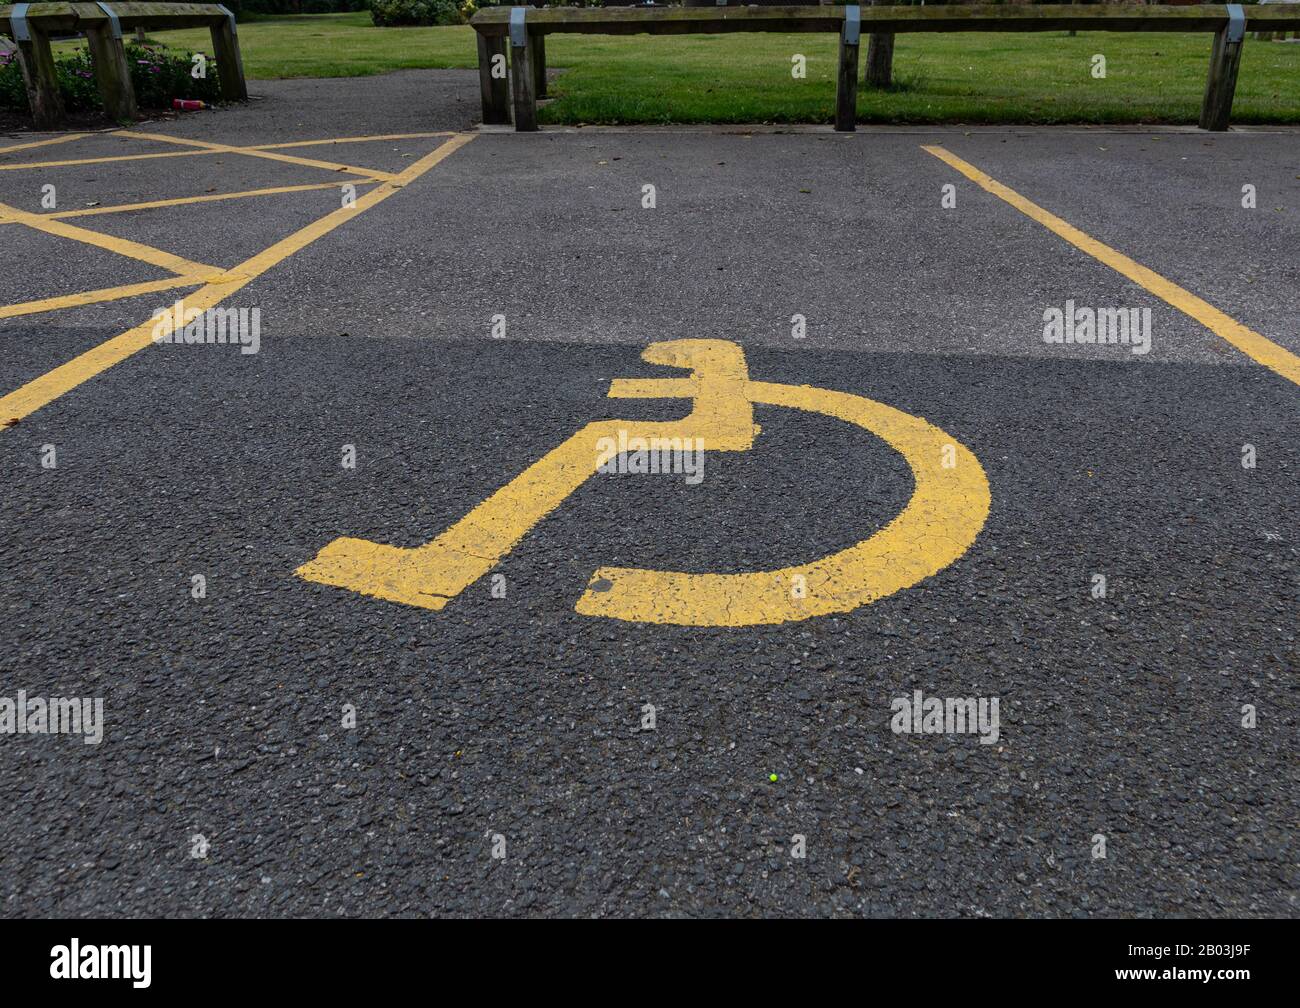 disabled parking space Wallasey Merseyside July 2019 Stock Photo